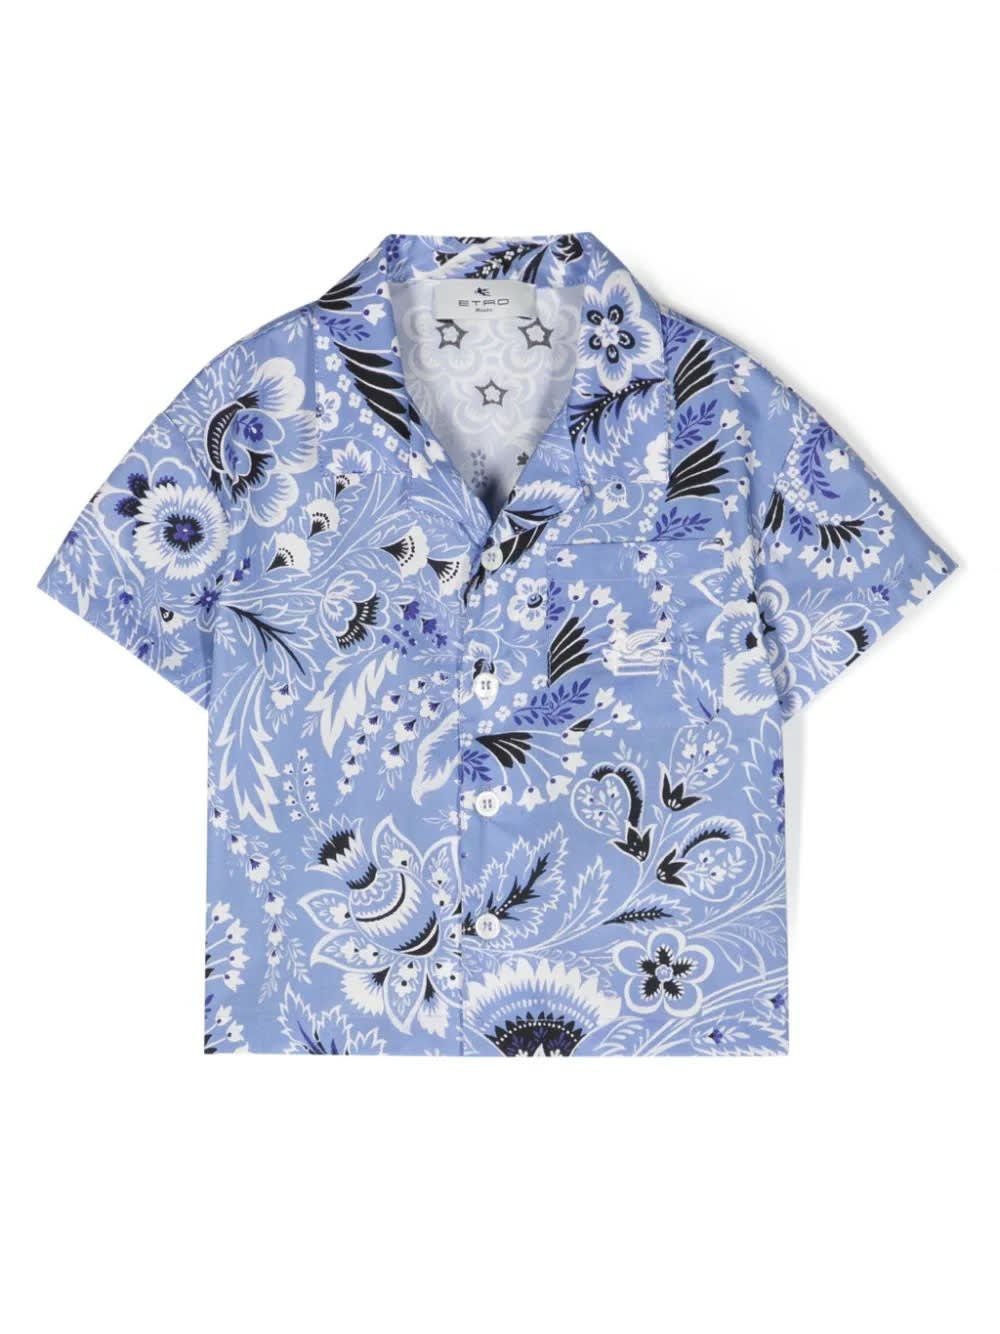 Etro Babies' Light Blue Bowling Shirt With Paisley Print